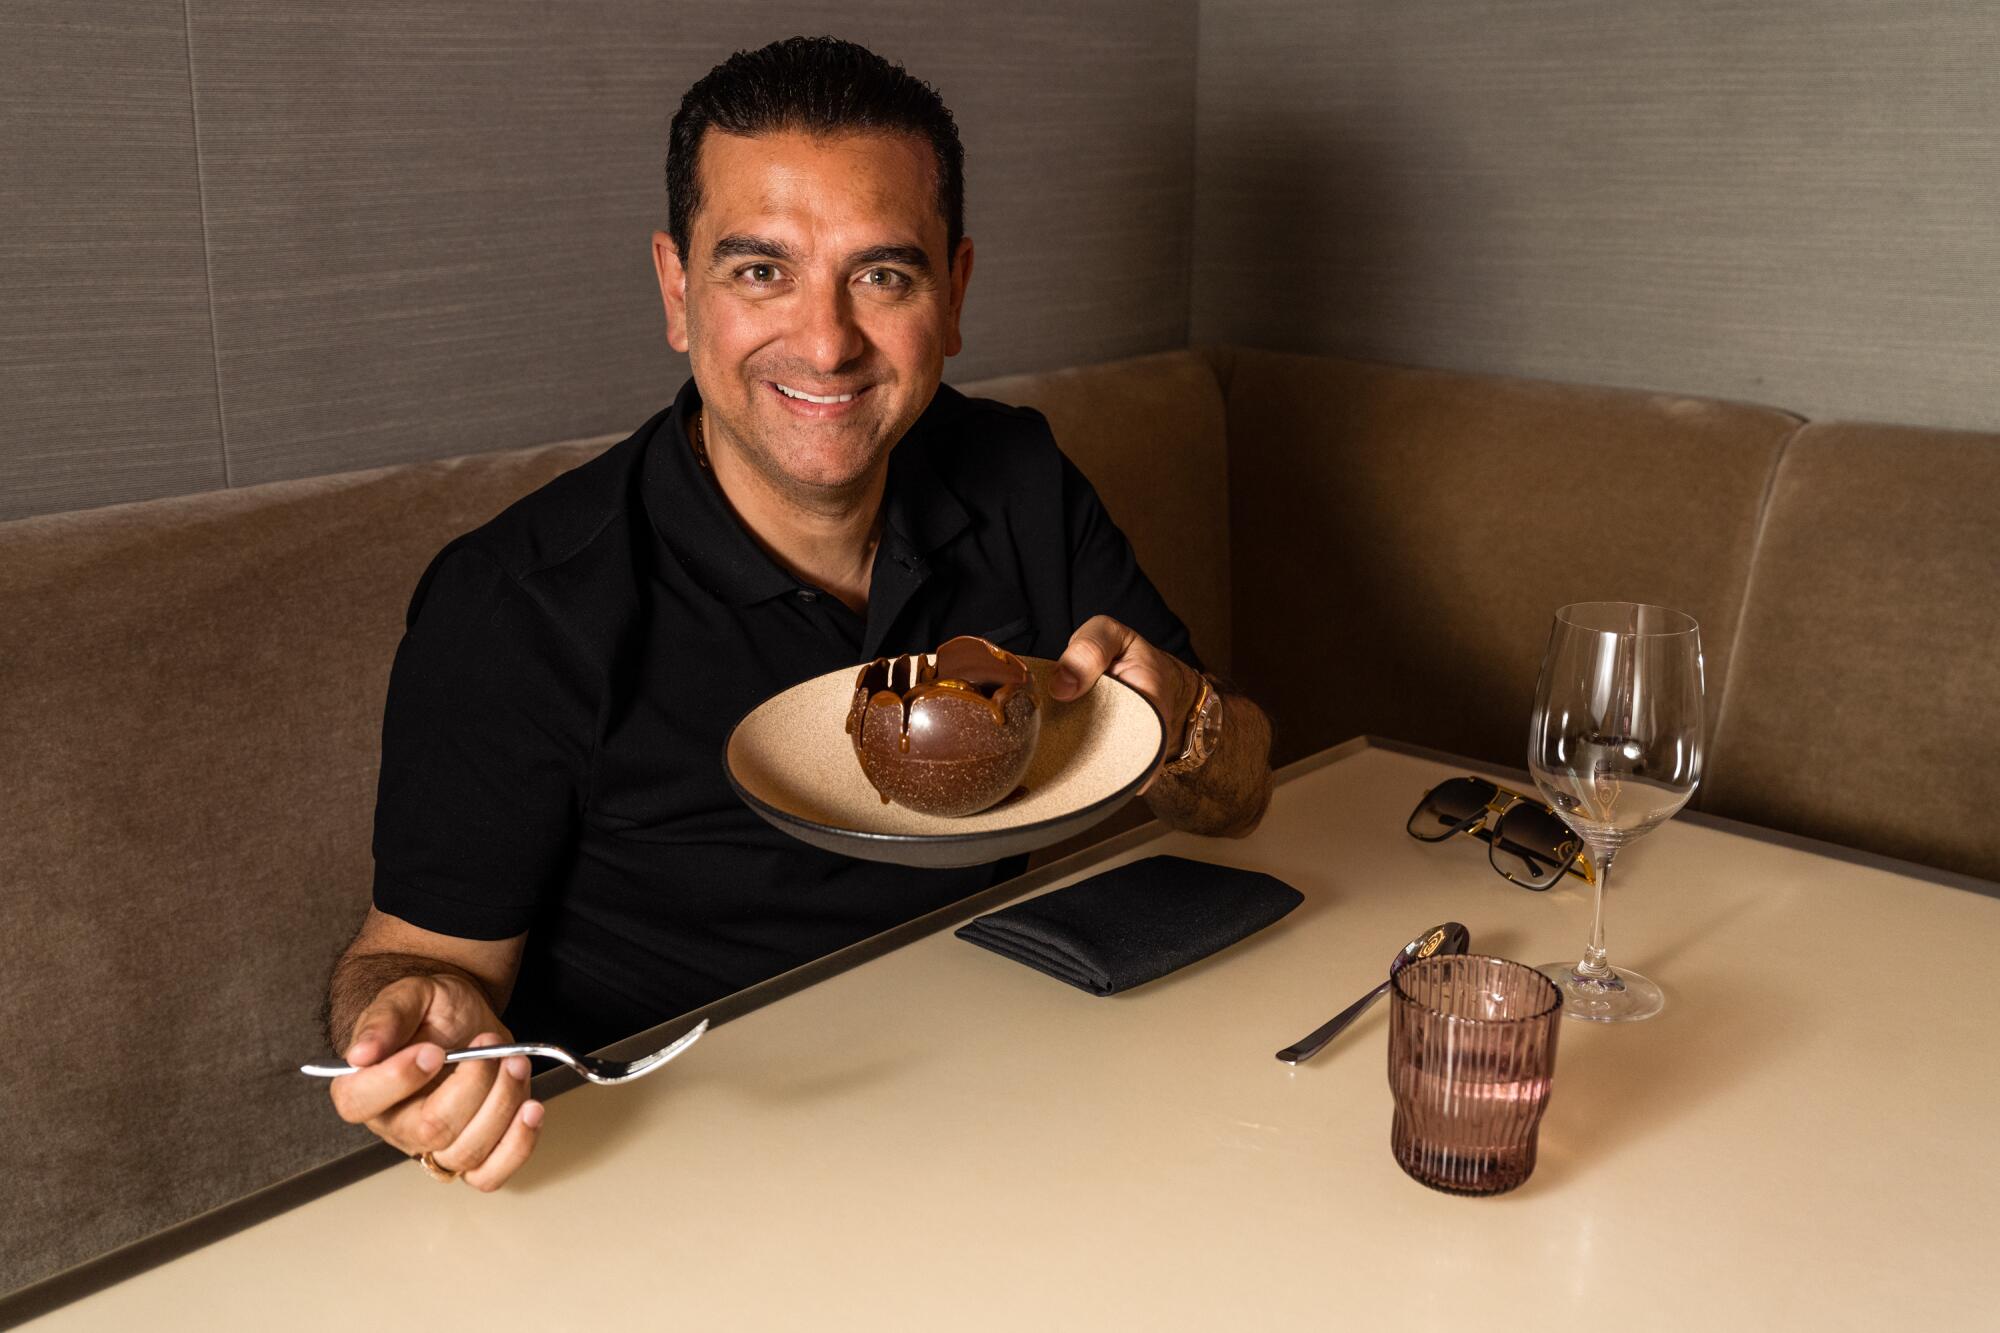 Buddy Valastro, seated at a restaurant table, holds up a plate with a chocolate-covered dessert